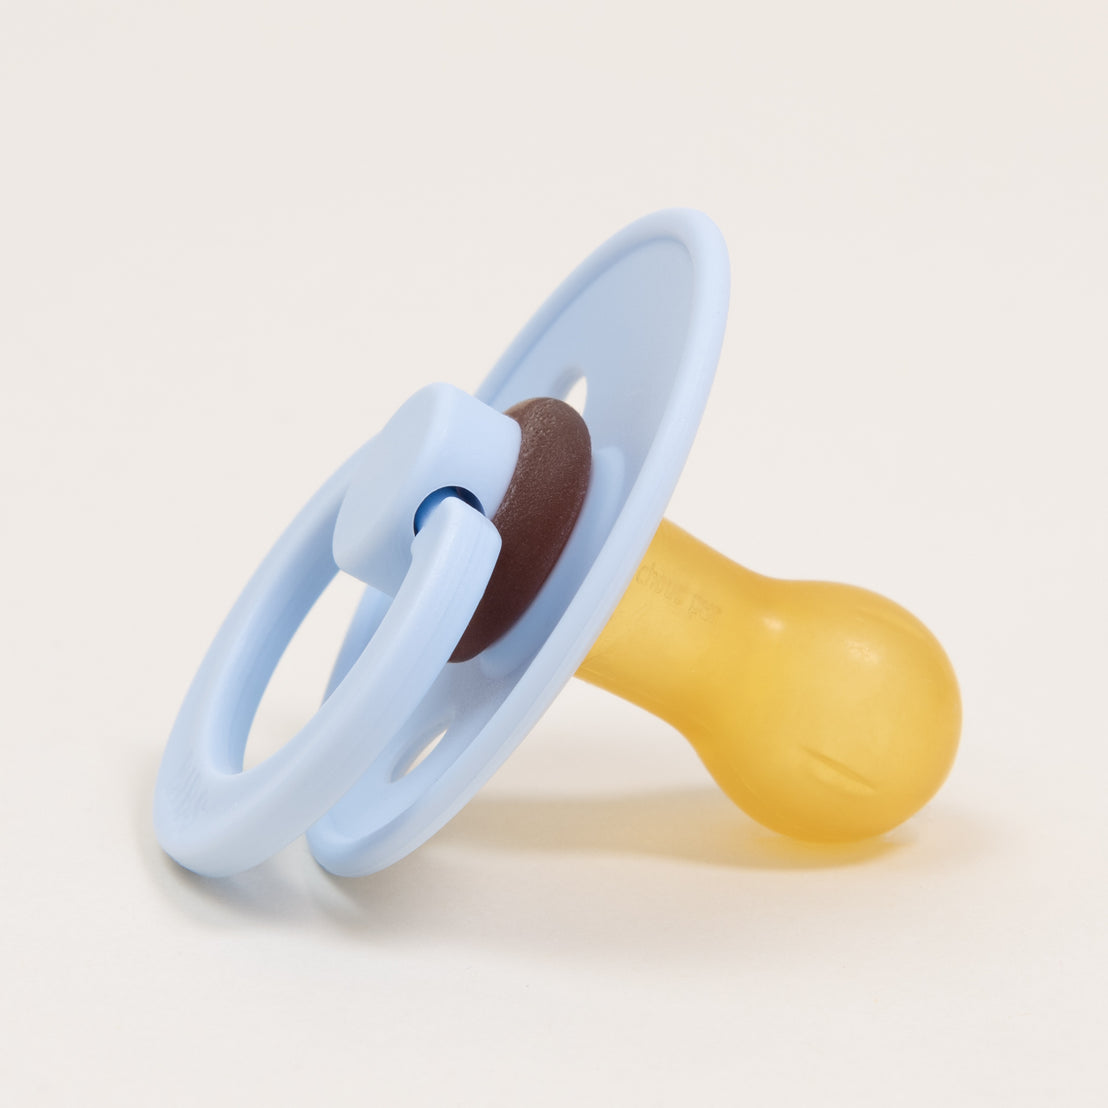 A Bibs Pacifier in Baby Blue with a light blue handle and a yellow natural rubber nipple, placed on a plain white background.